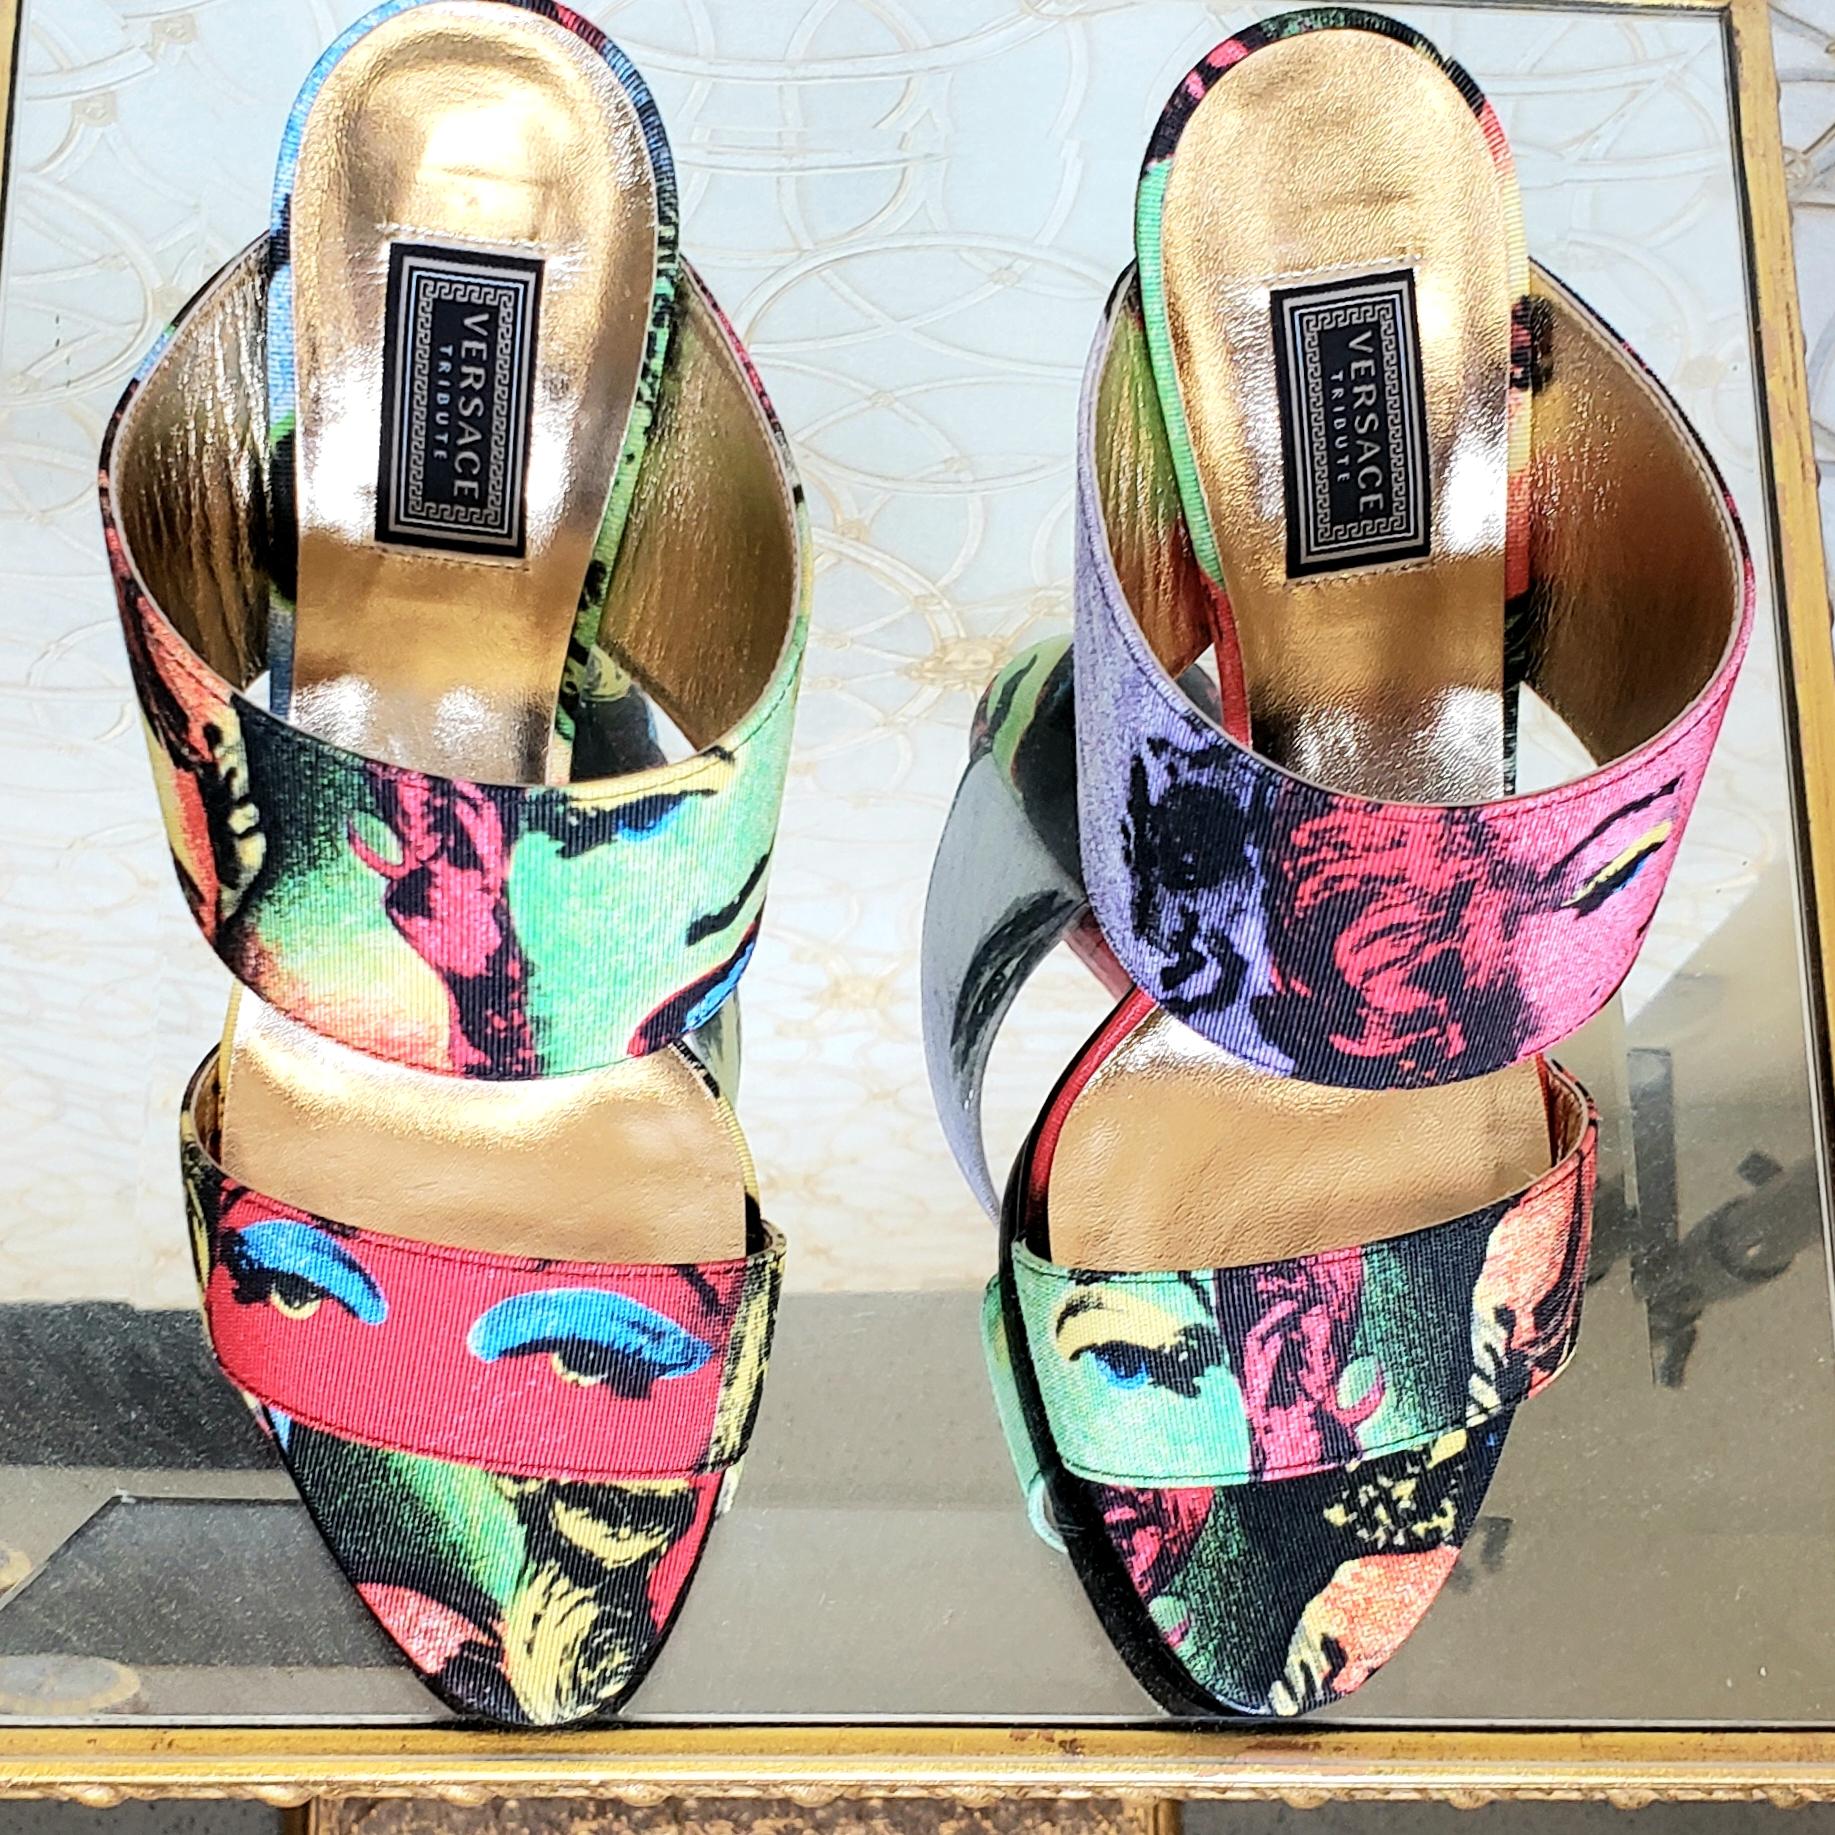 S/S 18 L# 52 VERSACE MULTI COLOR MARILYN MONROE TRIBUTE 1990 size 37 - 7 In New Condition For Sale In Montgomery, TX